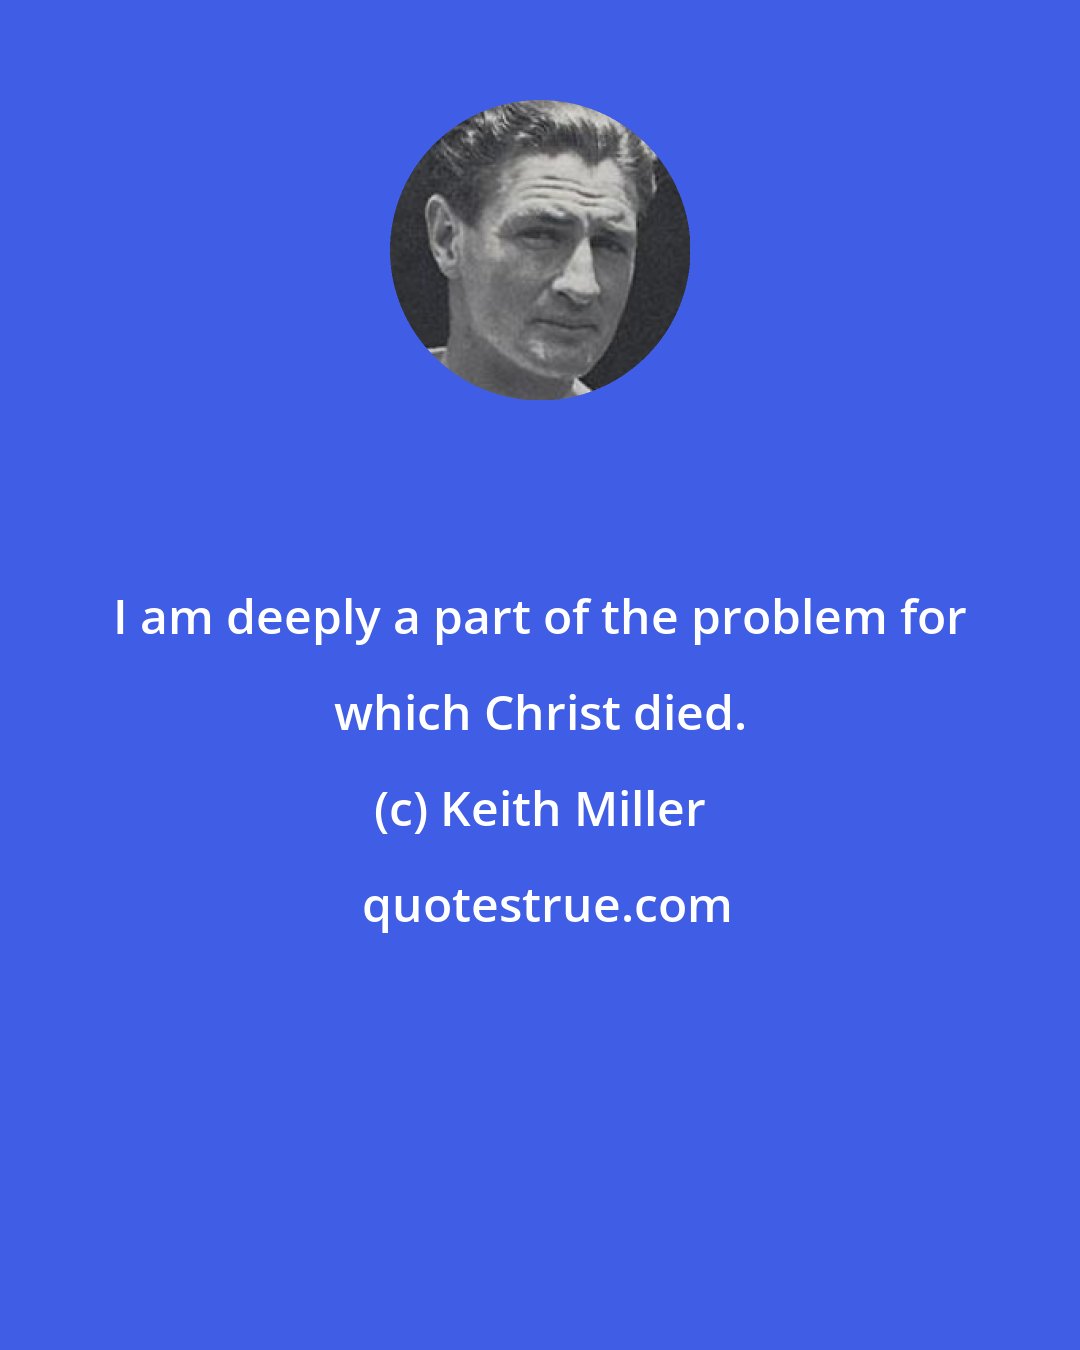 Keith Miller: I am deeply a part of the problem for which Christ died.